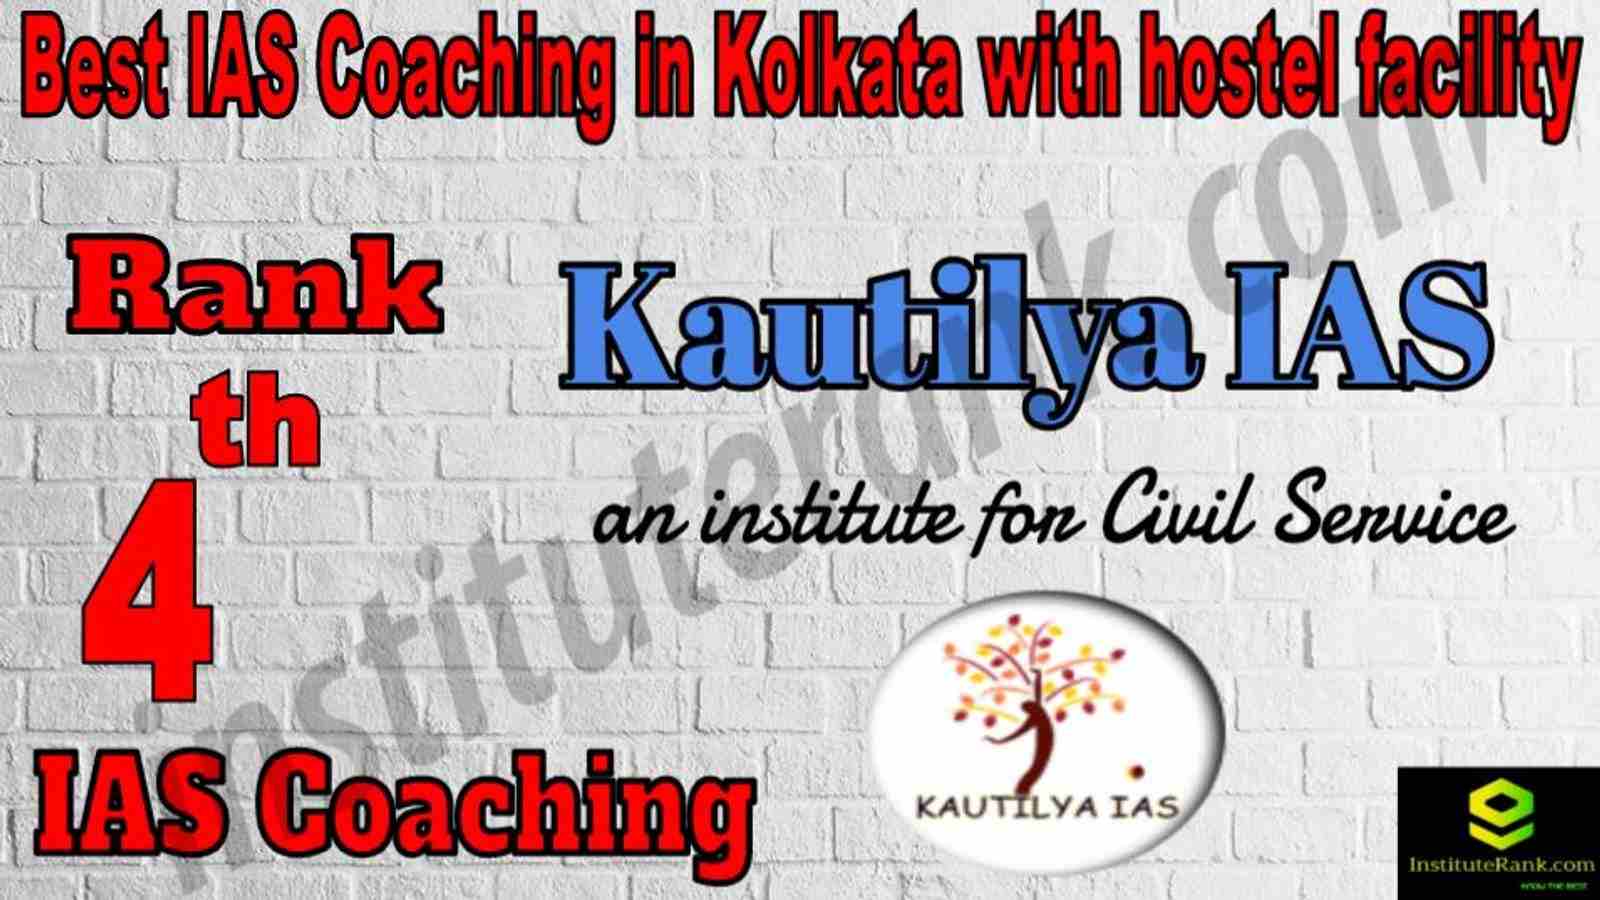 4th Best IAS Coaching in Kolkata with hostel facility